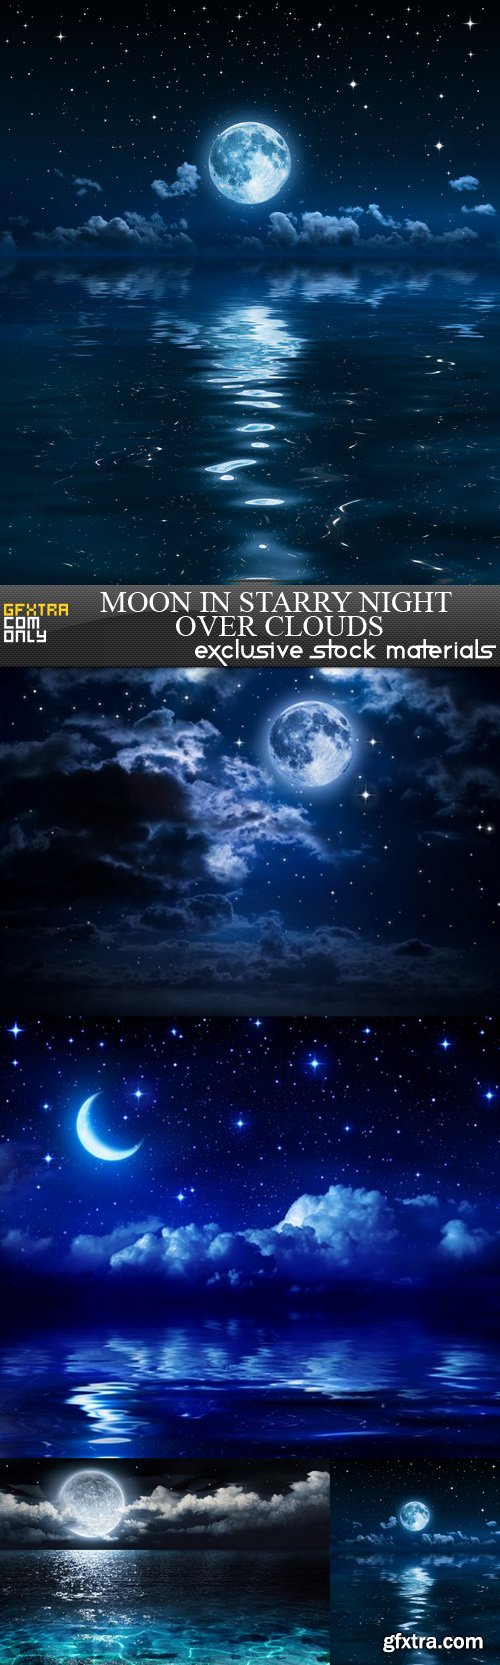 Moon in Starry Night Over Clouds - 5 UHQ JPEG